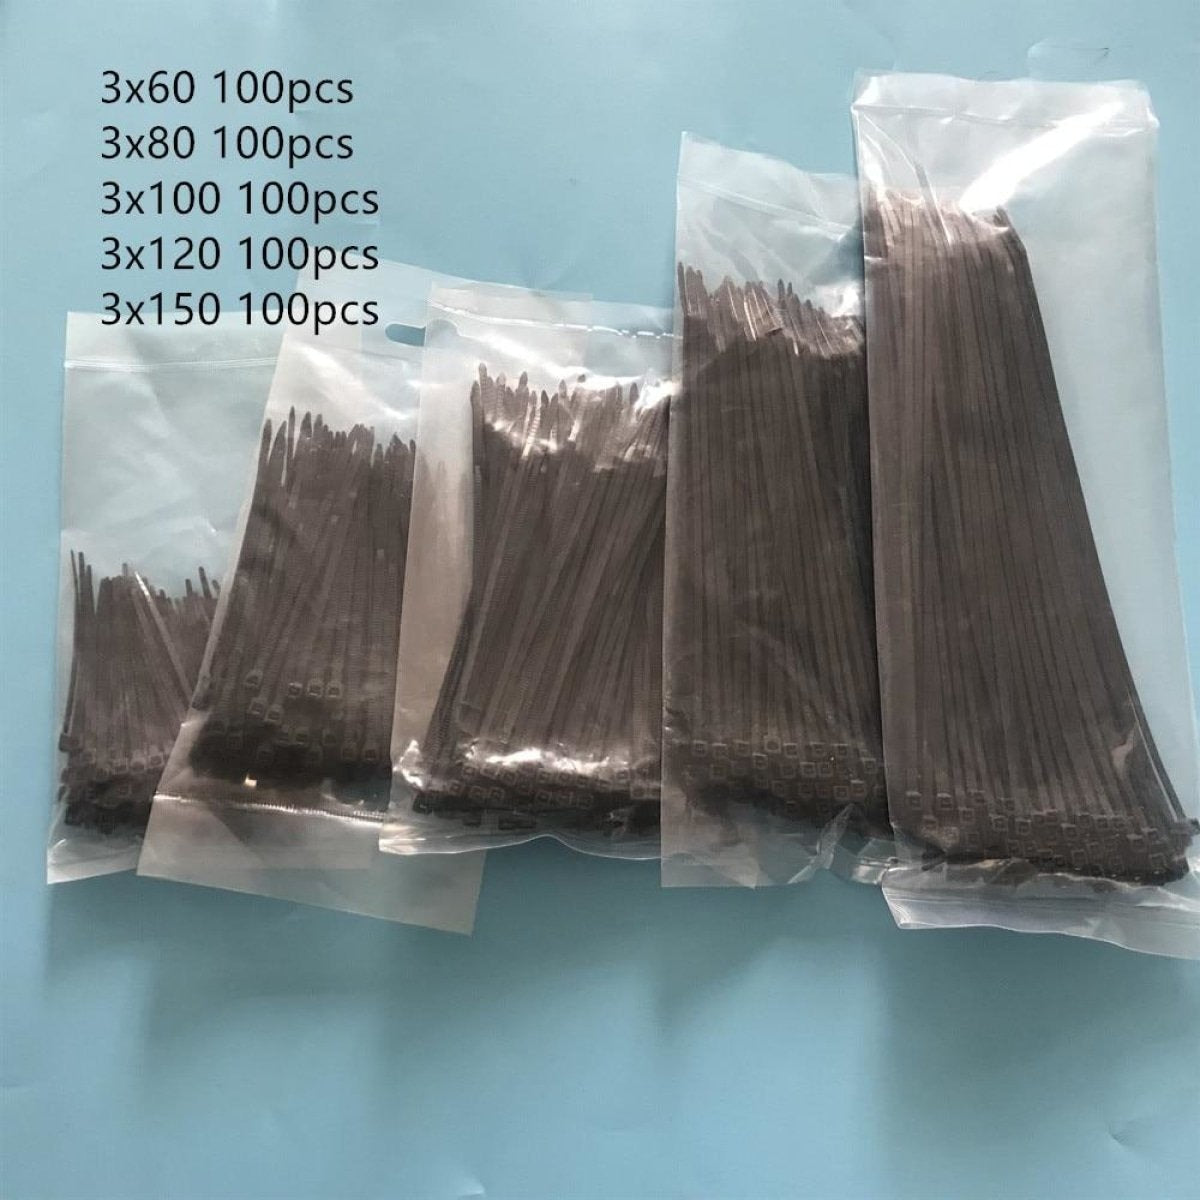 500pcs Assorted Cable Zip Ties 3x60 3x80 3x100 3x120 3x150mm | Black | Asia Sell